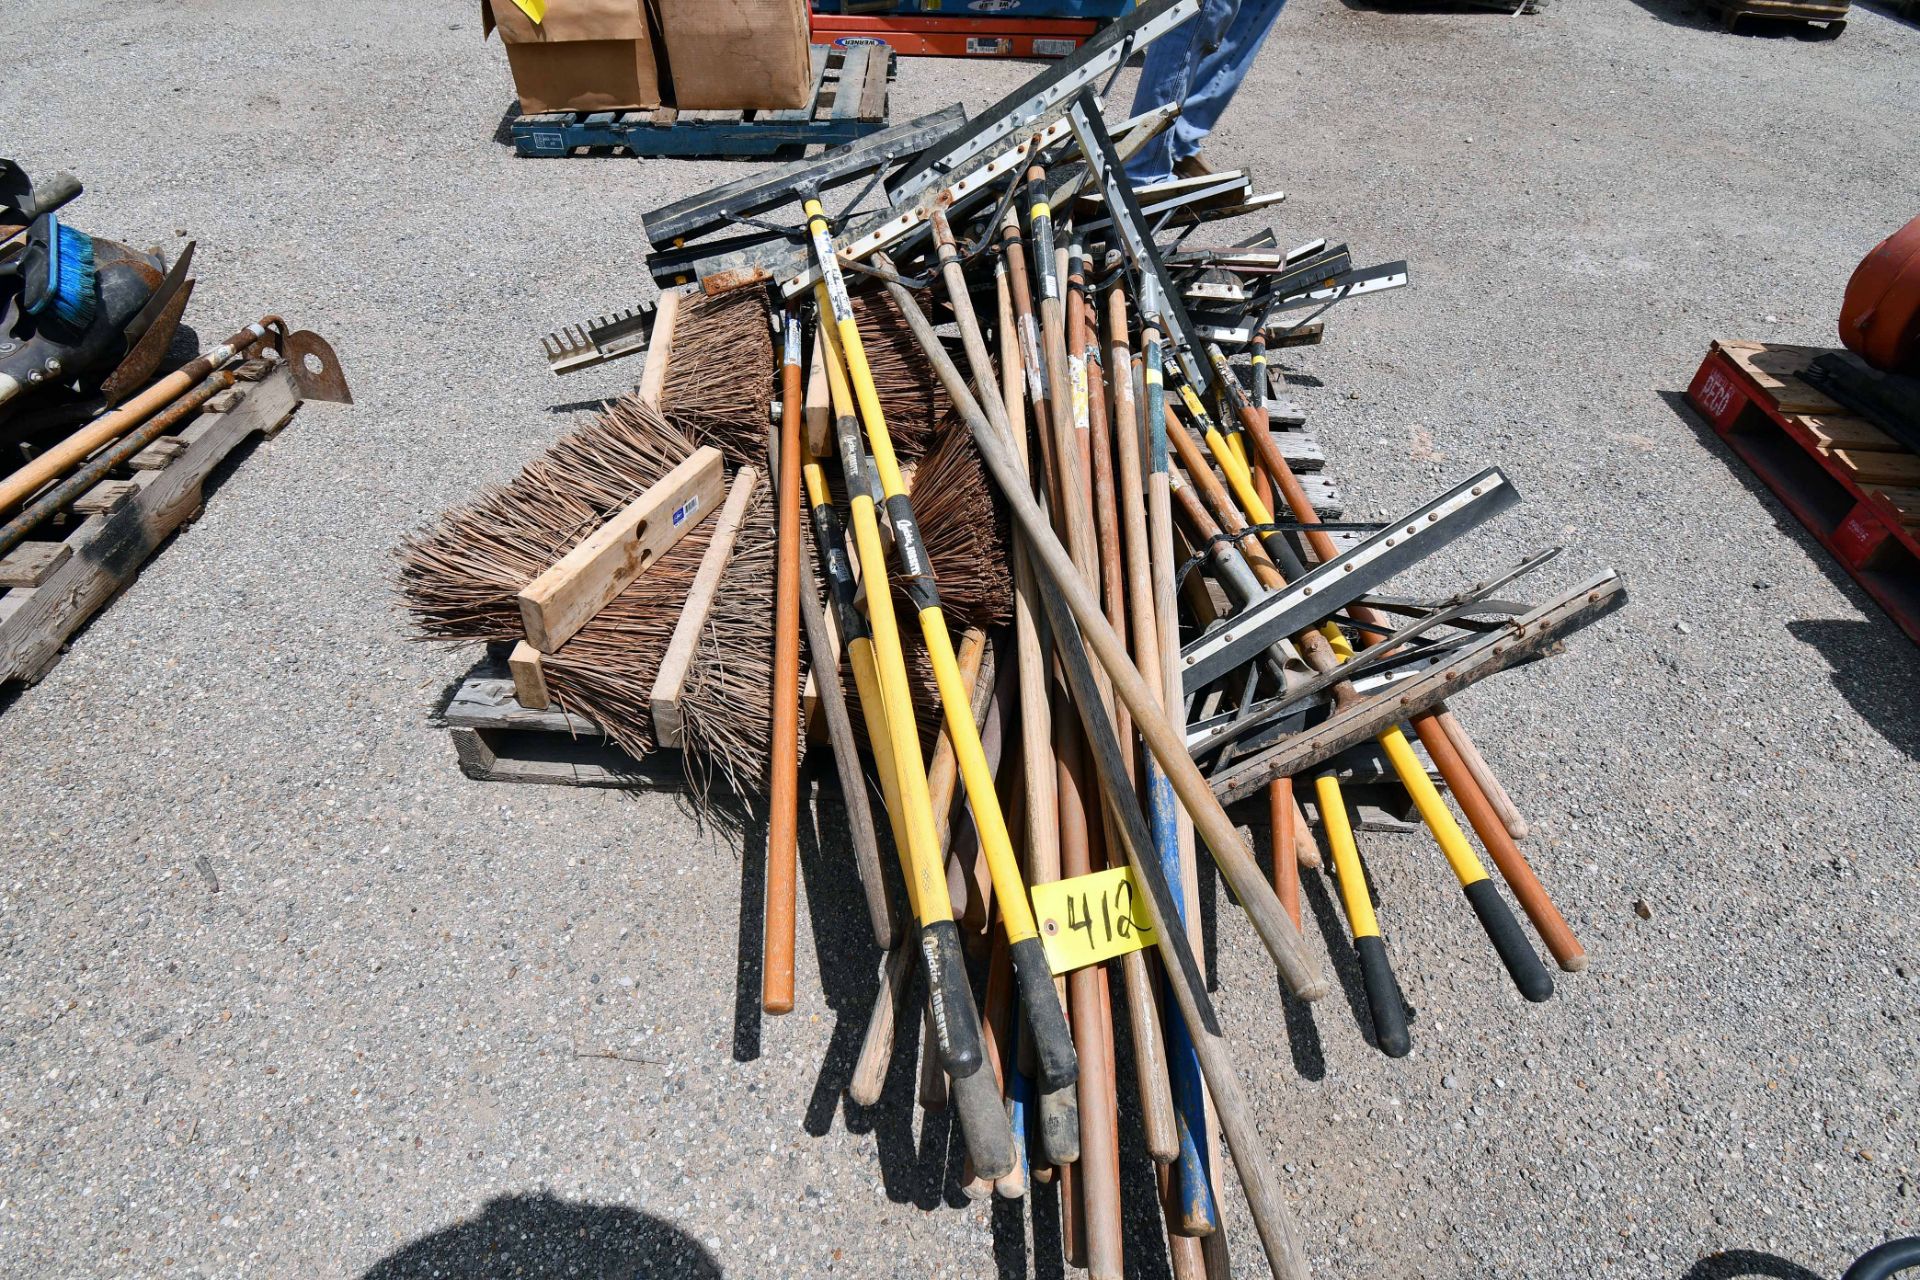 LOT CONSISTING OF: brooms & squeegees (on one pallet) (Location: MDS Boring & Drilling, 11900 Hirsch